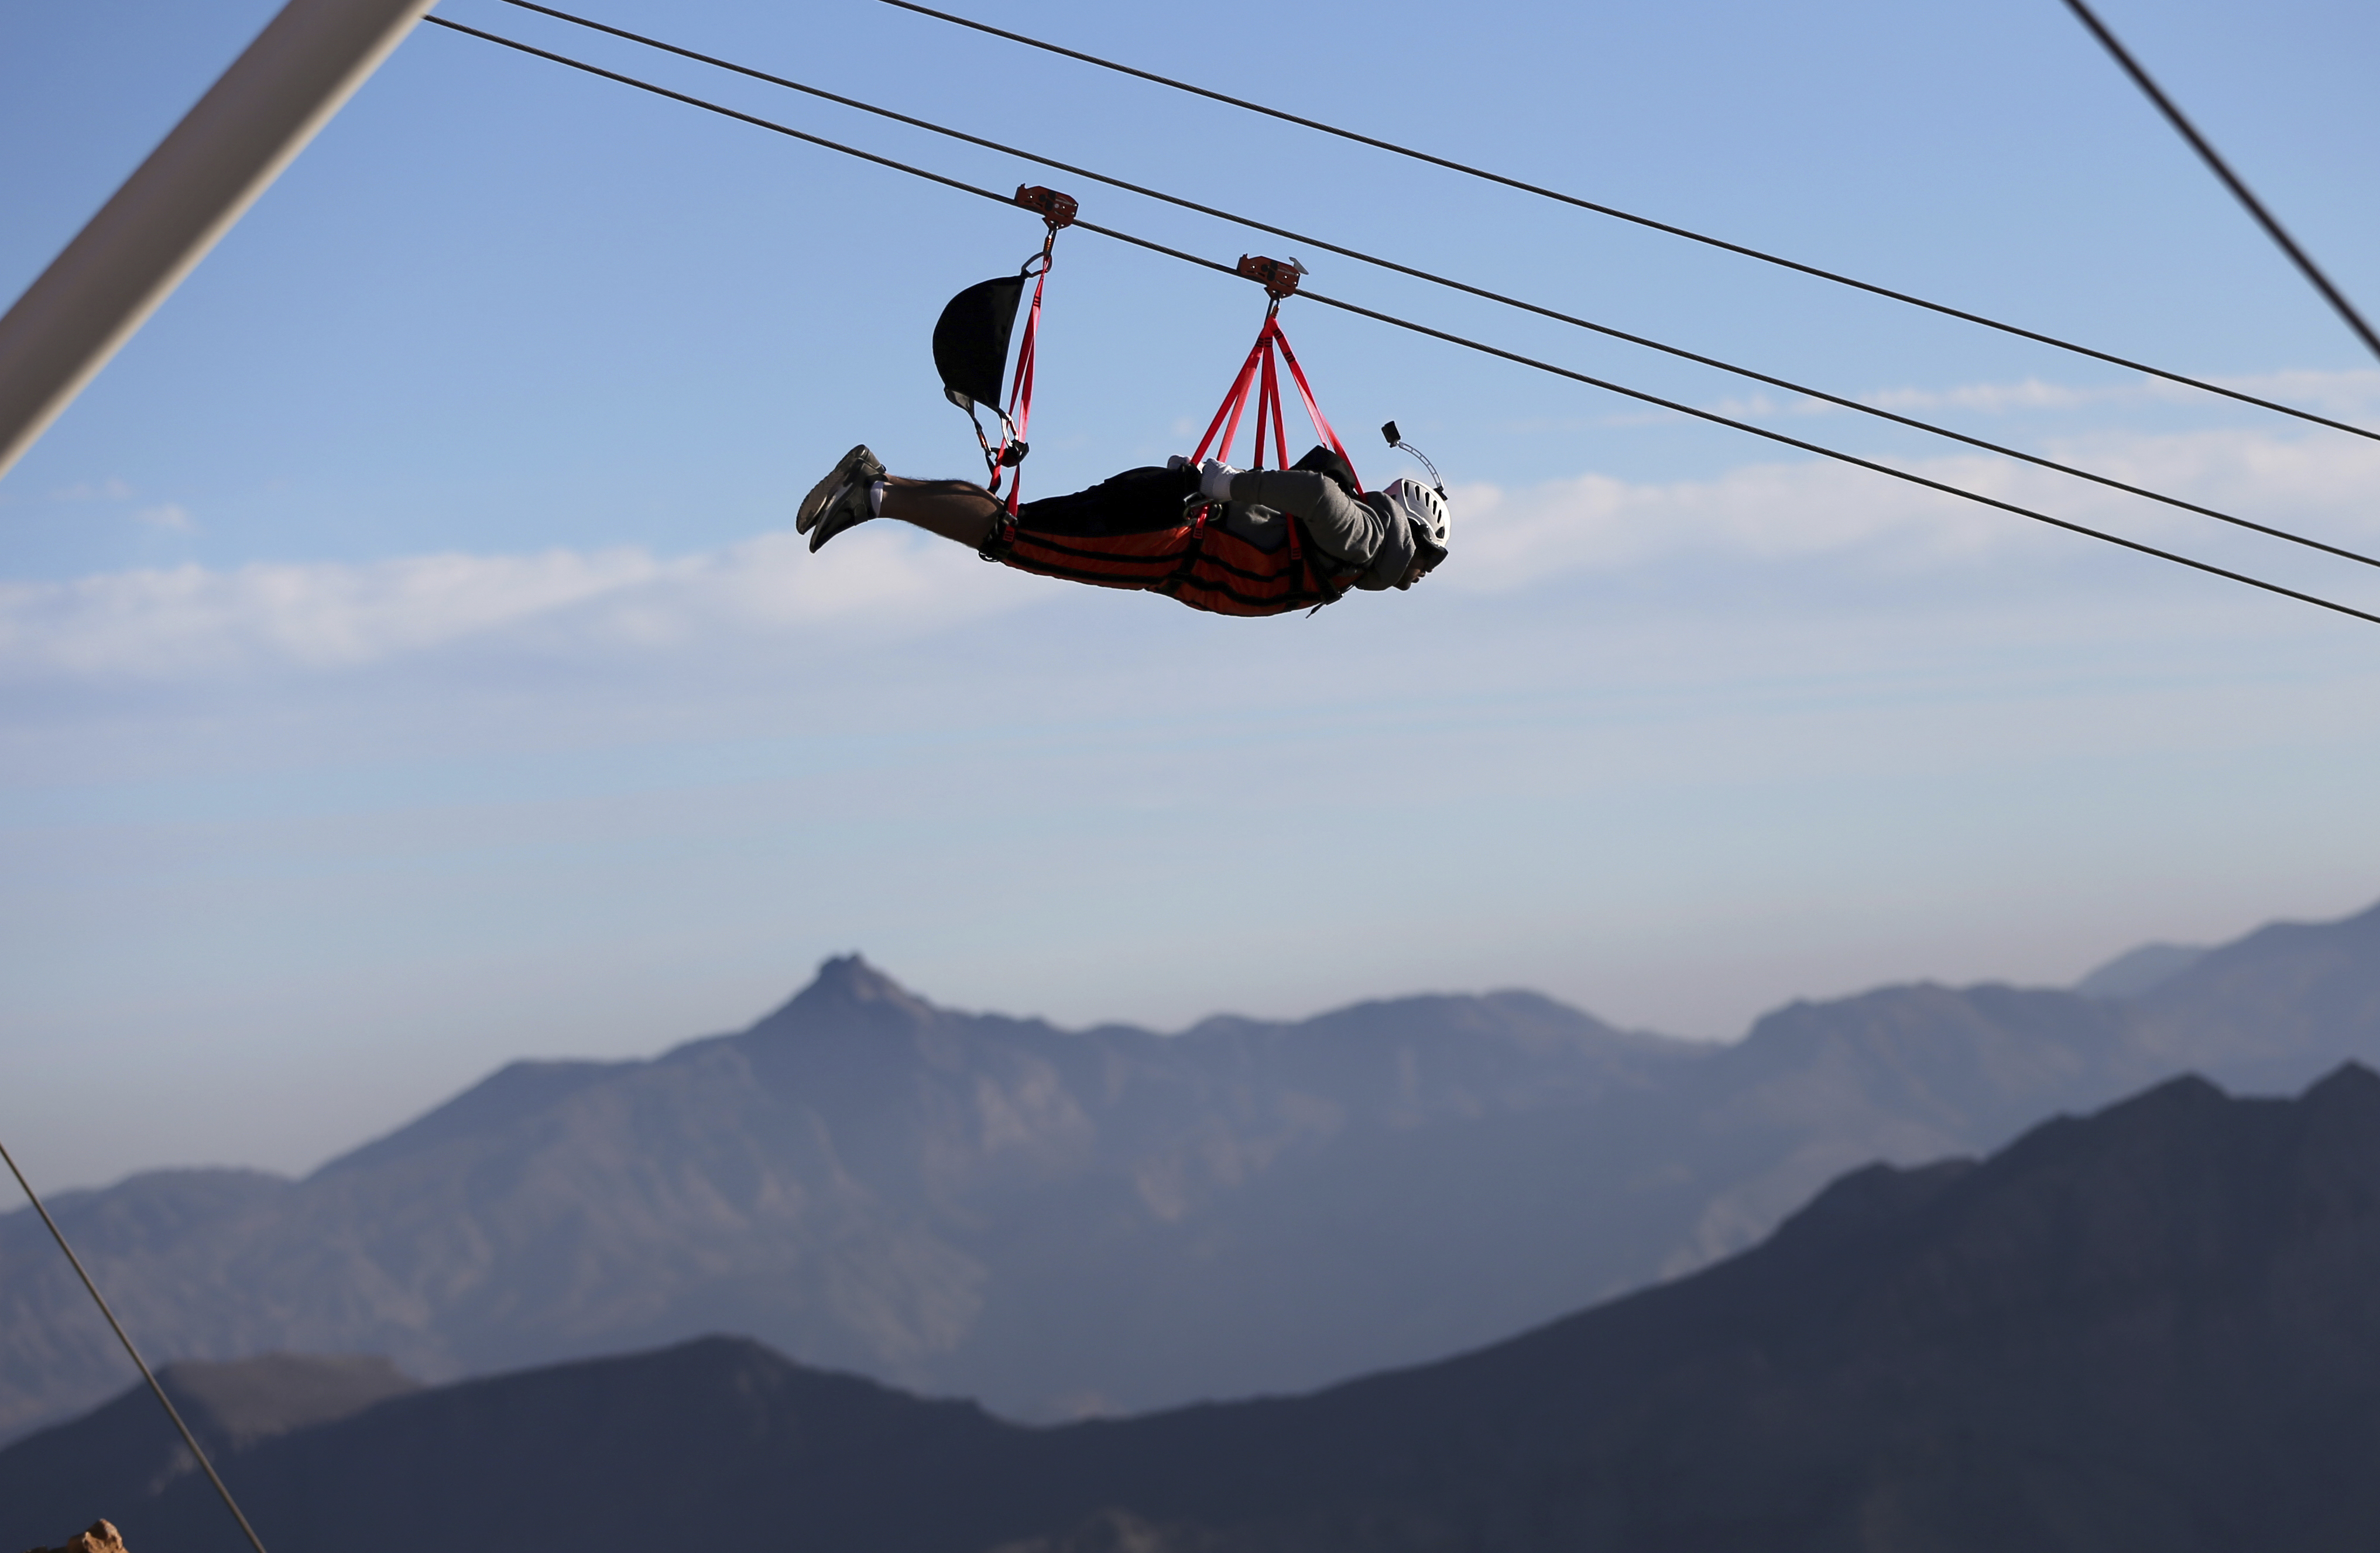 In this Wednesday, Jan. 31, 2018 photo,  a thrill-seeker rides from the UAE's highest mountain as he tries out a new zip line, on the peak of Jebel Jais mountain, 25 kms (15.5 miles) north east of Ras al-Khaimah, United Arab Emirates. The UAE is claiming a new world record with the opening of the world's longest zip line, measuring 2.83 kilometers (1.76 miles) in length. Guinness World Records officials certified the zip line on Thursday, the same day the attraction opened to the public. (AP Photo/Kamran Jebreili)